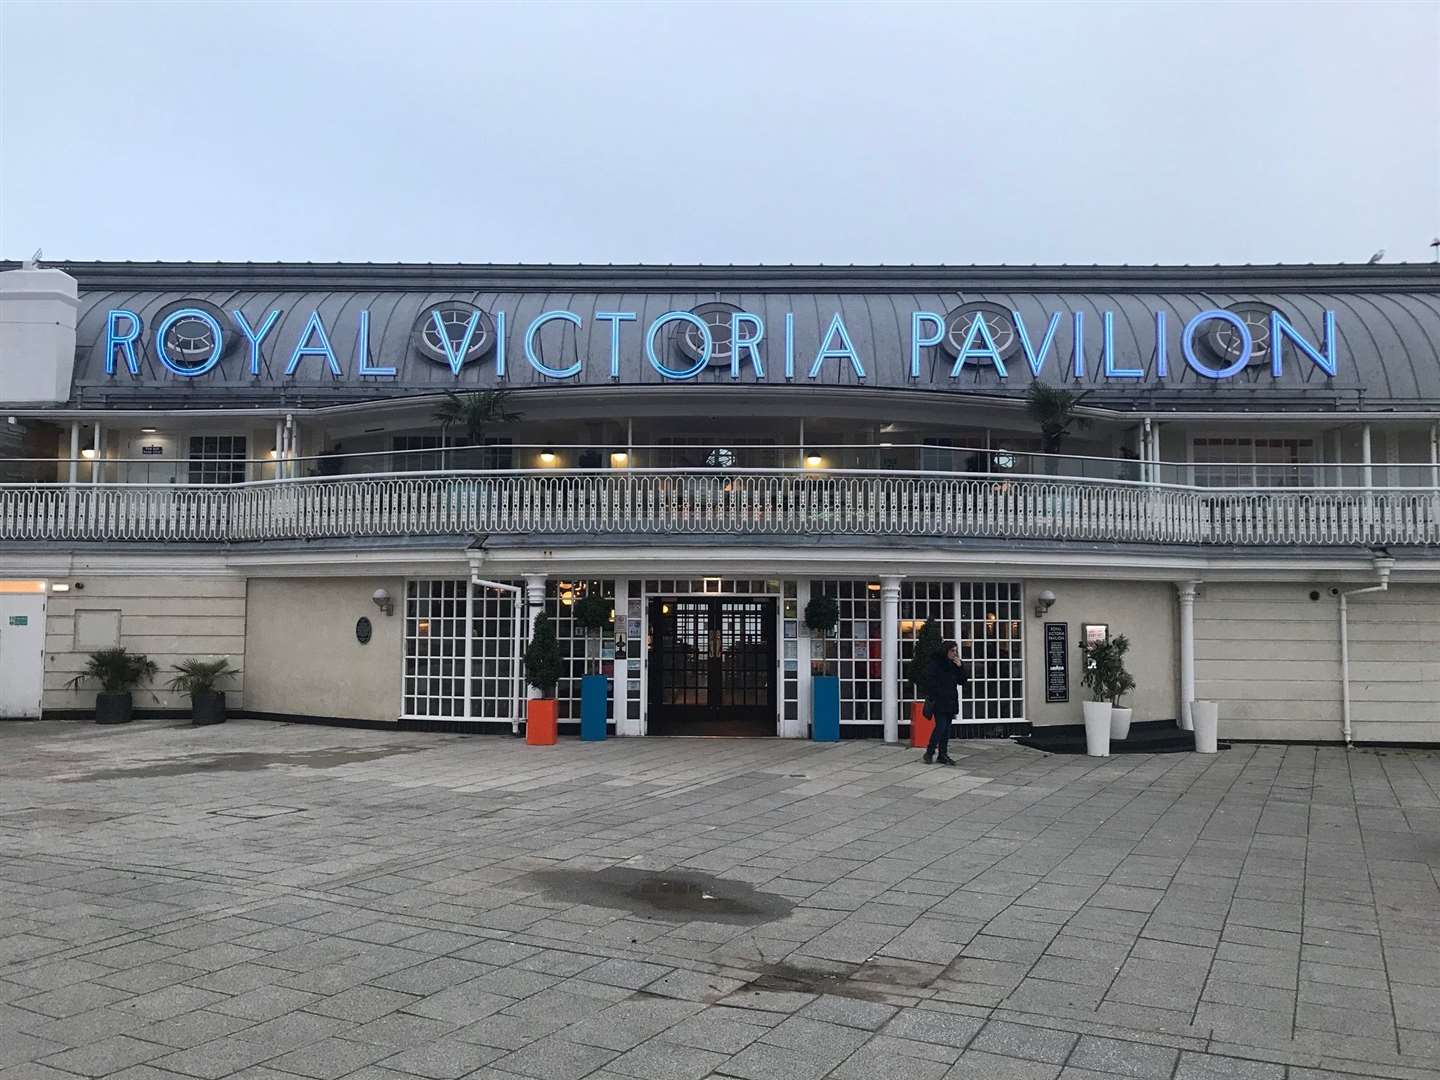 The Royal Victoria Pavilion in Ramsgate, where the pair spent their ill-gotten gains